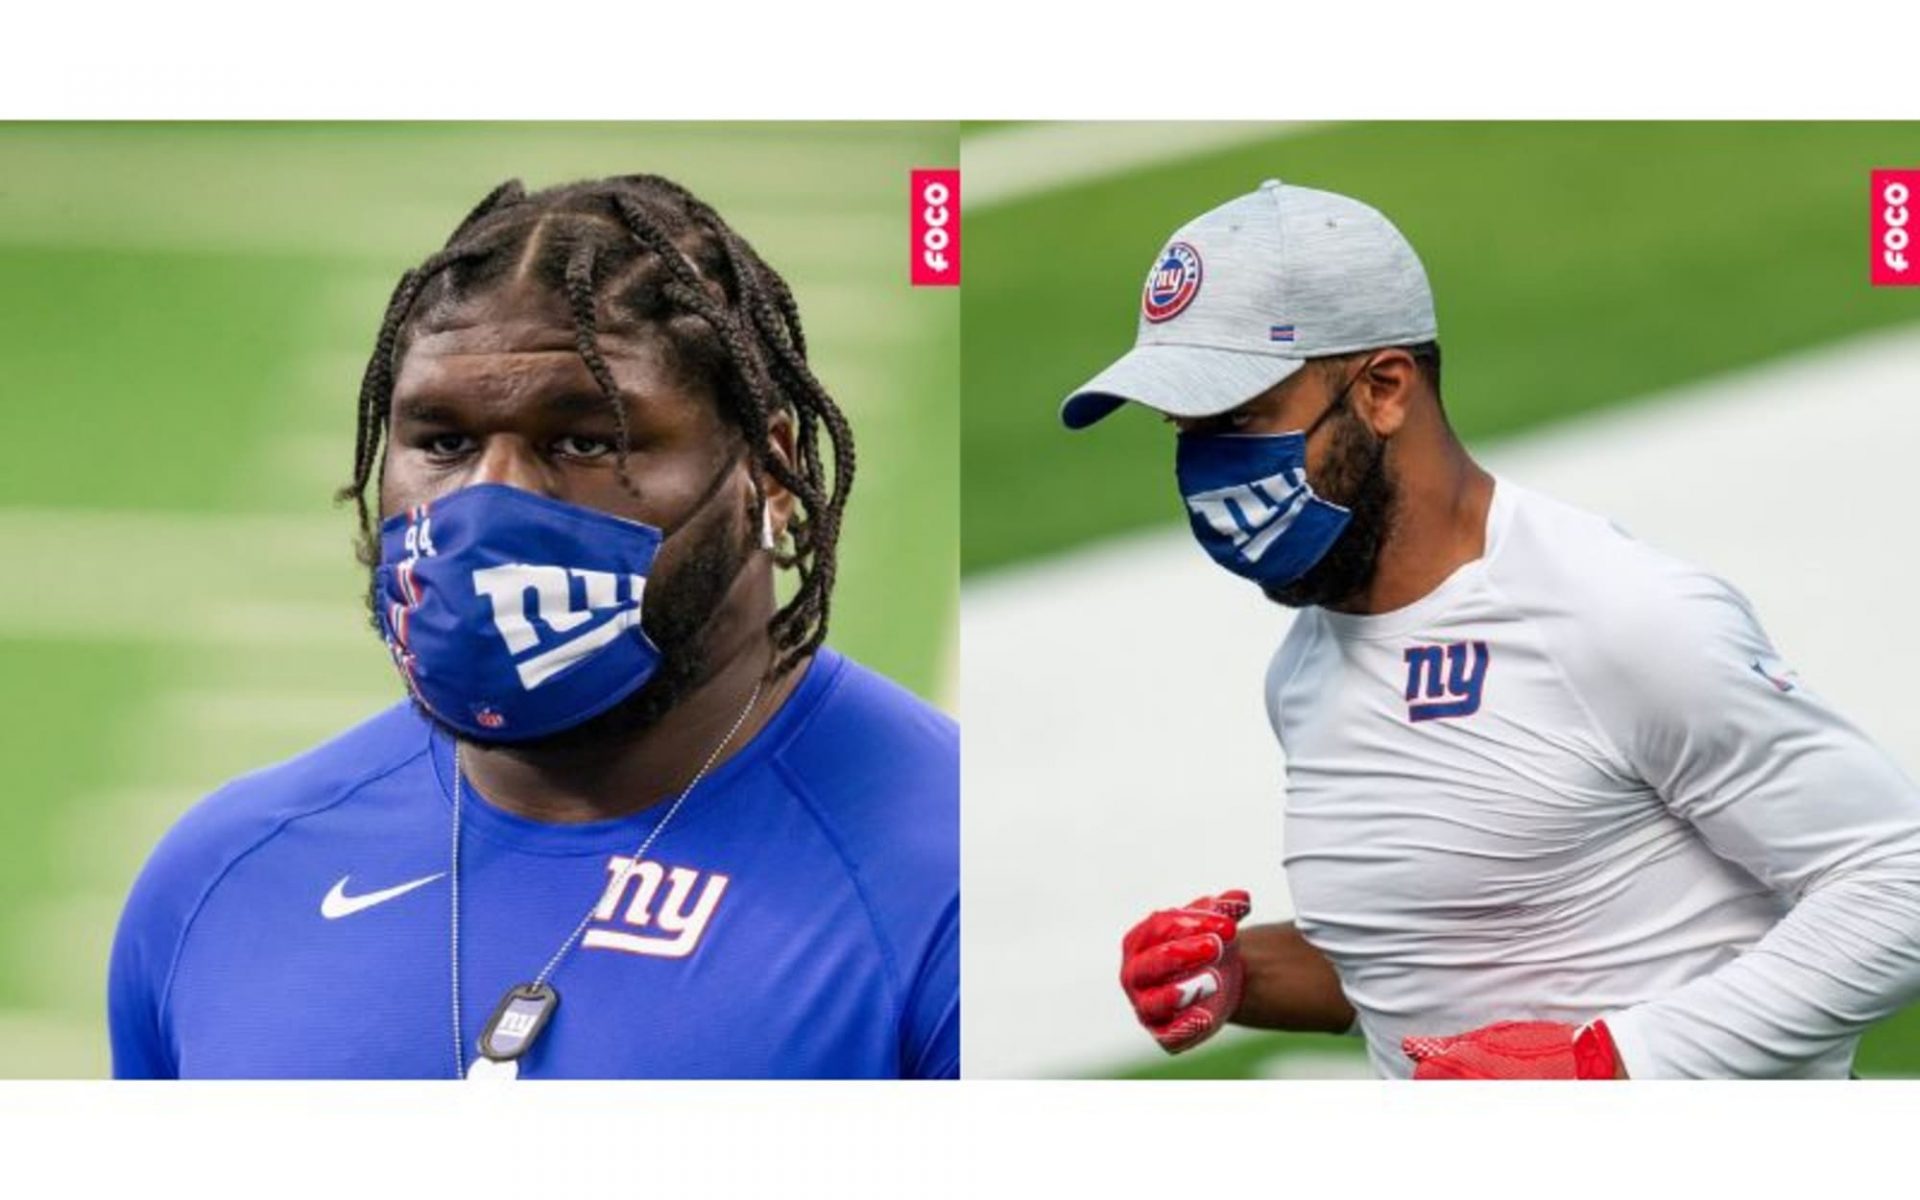 Rock the equivalent face covers as your accepted NFL players with FOCO